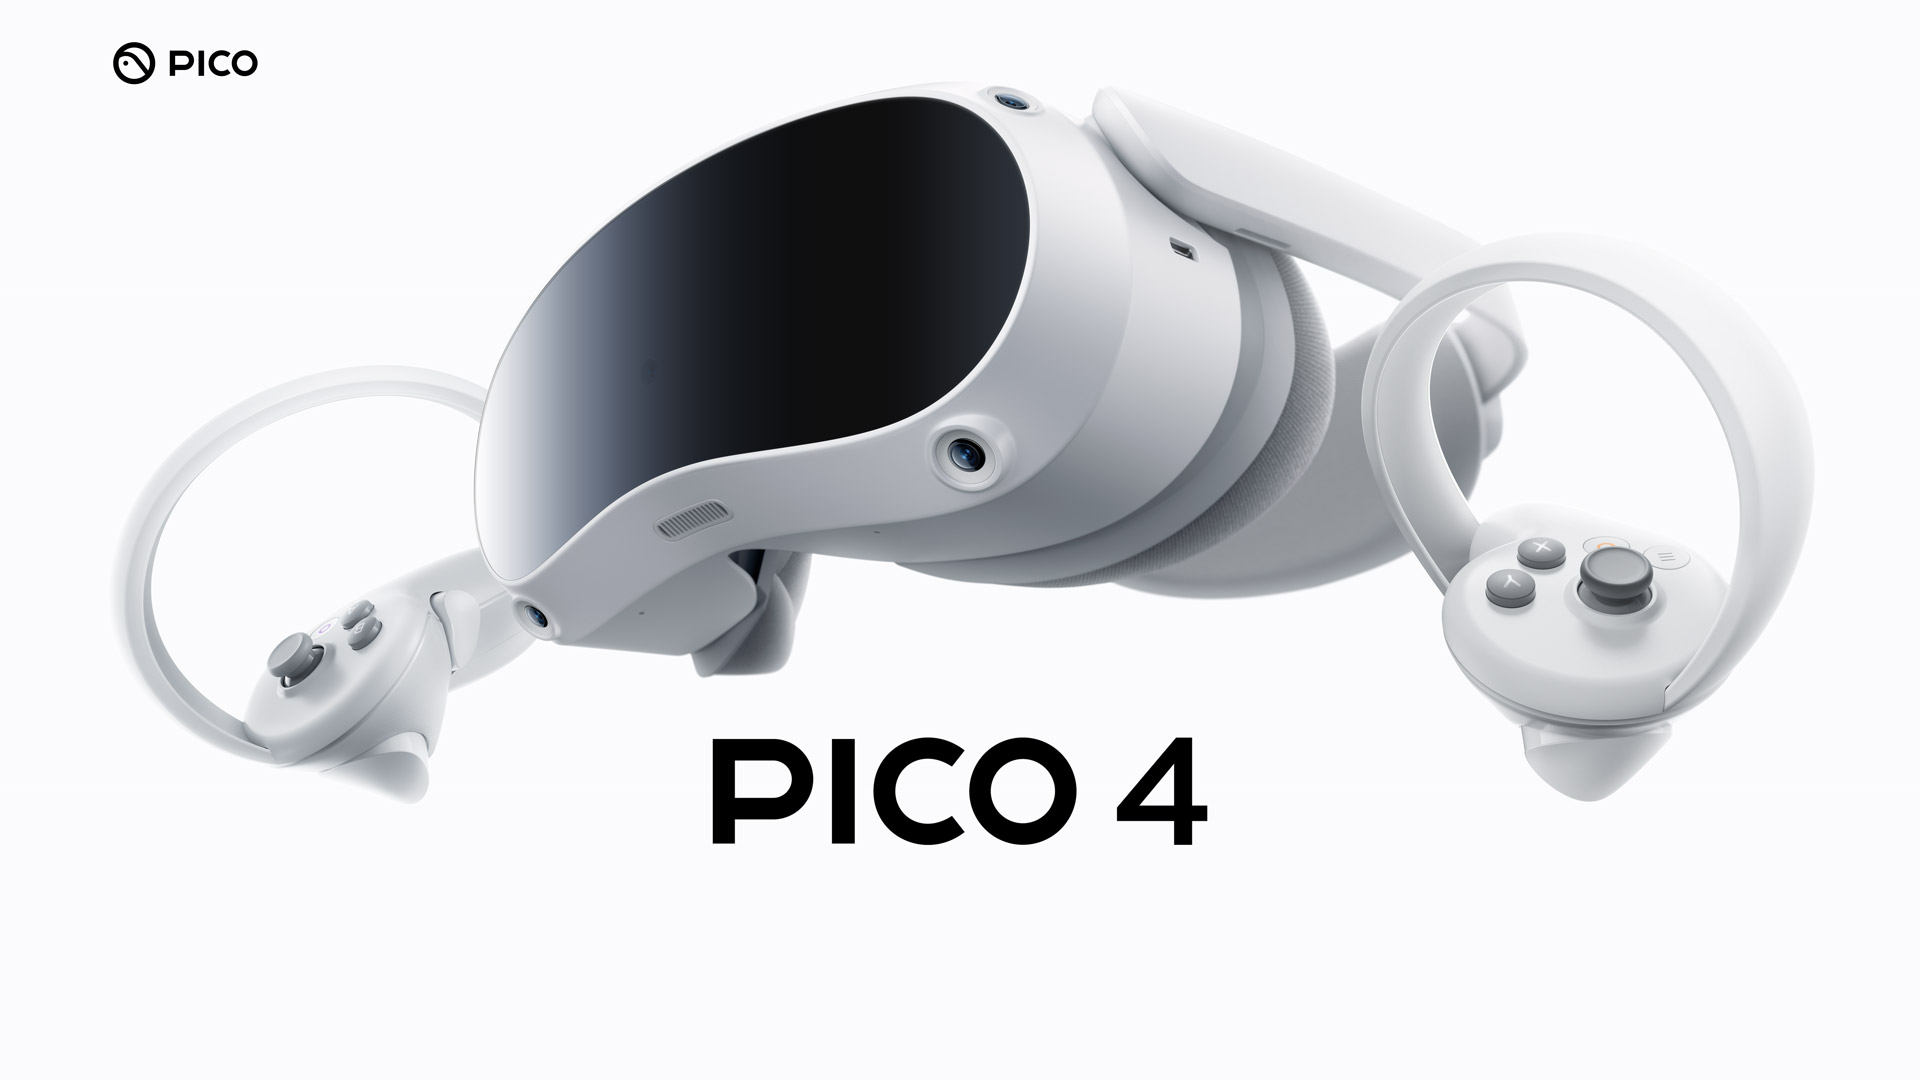 Pico Plans to Take on Apple’s Vision Pro - Trade News - 2